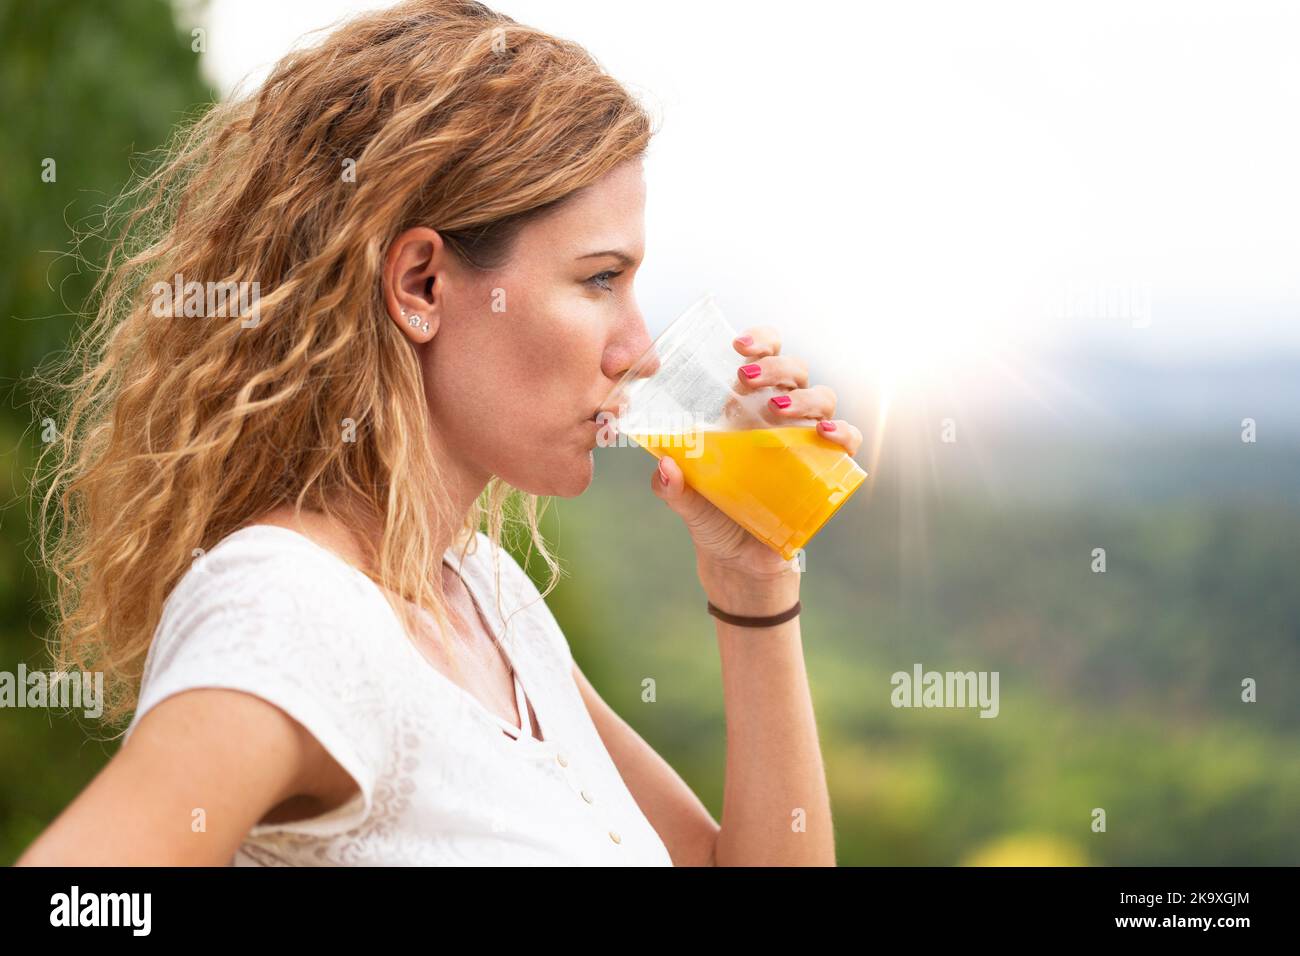 Young woman with curly hair drinking fresh juice at outdoors at morning, profile view Stock Photo